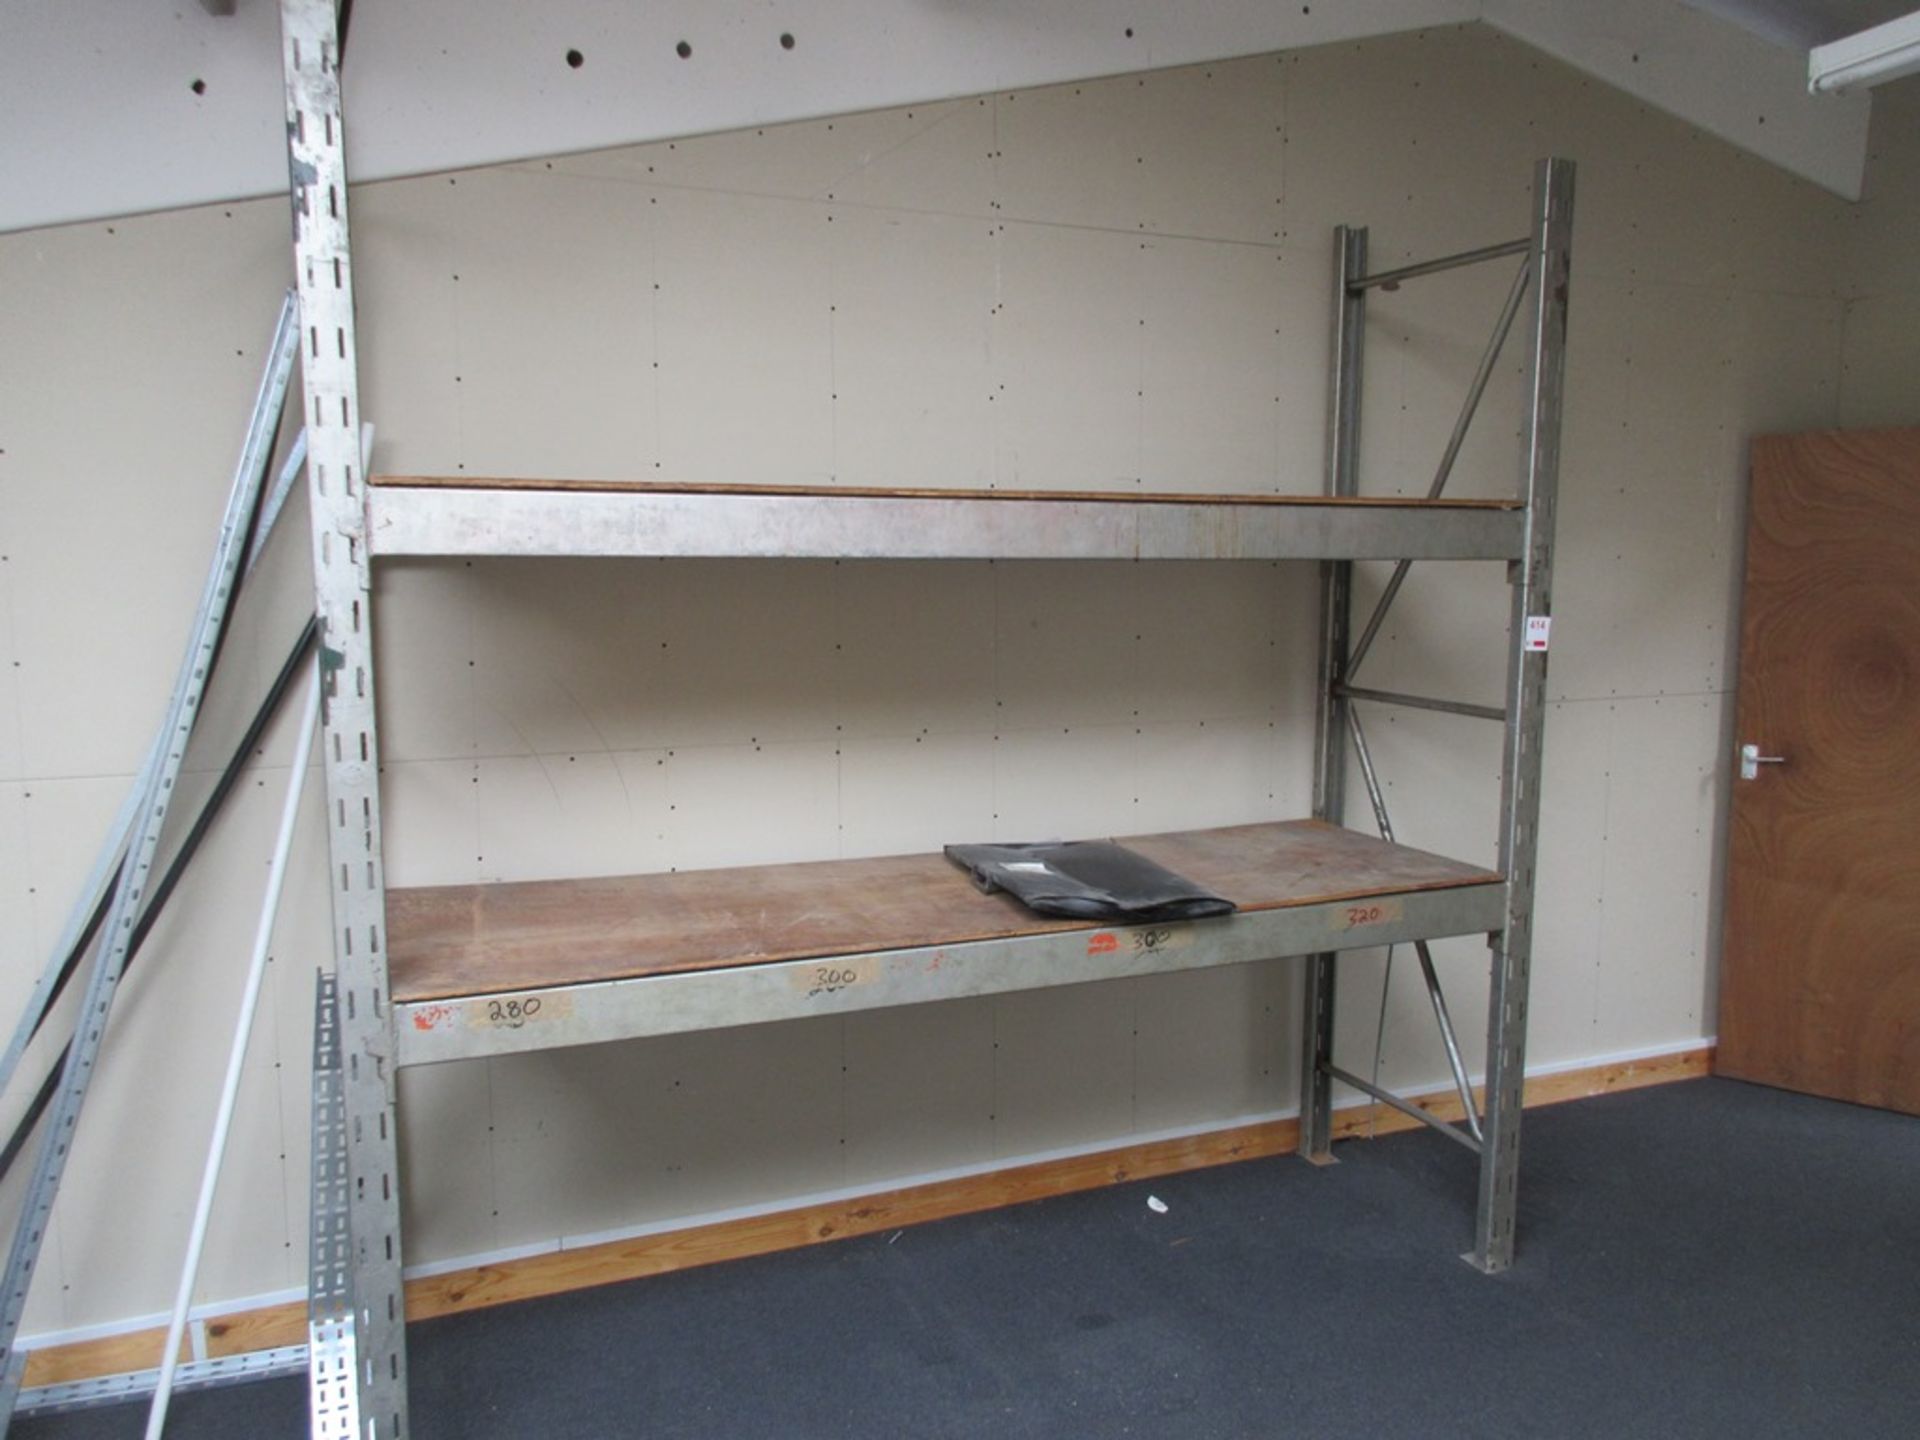 Bay of adjustable boltless racking approx. 2440 x 720mm x height 2440mm and assorted tower scaffol - Image 3 of 4